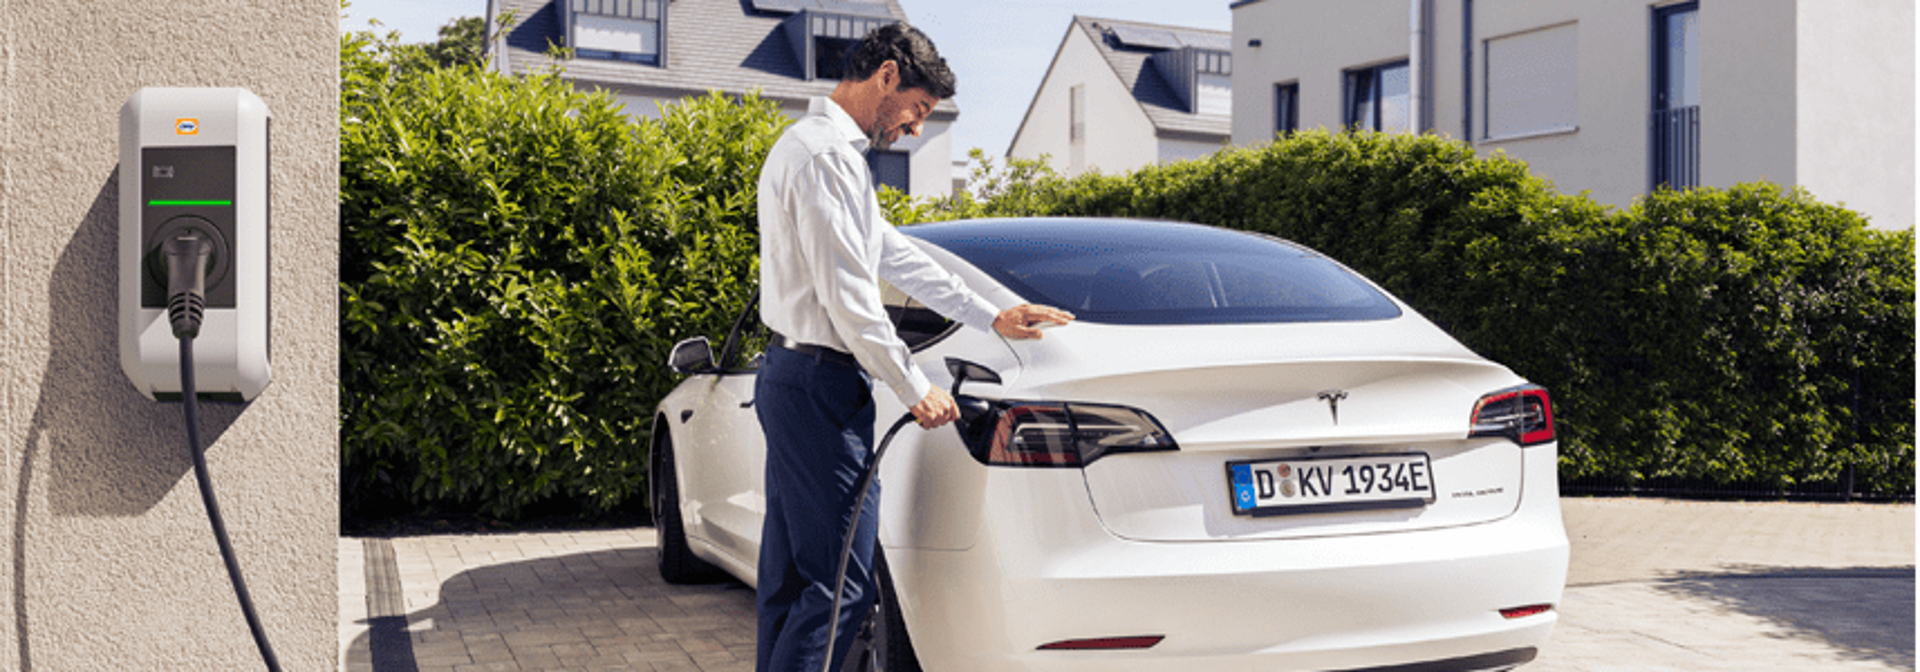 Charging your car at home